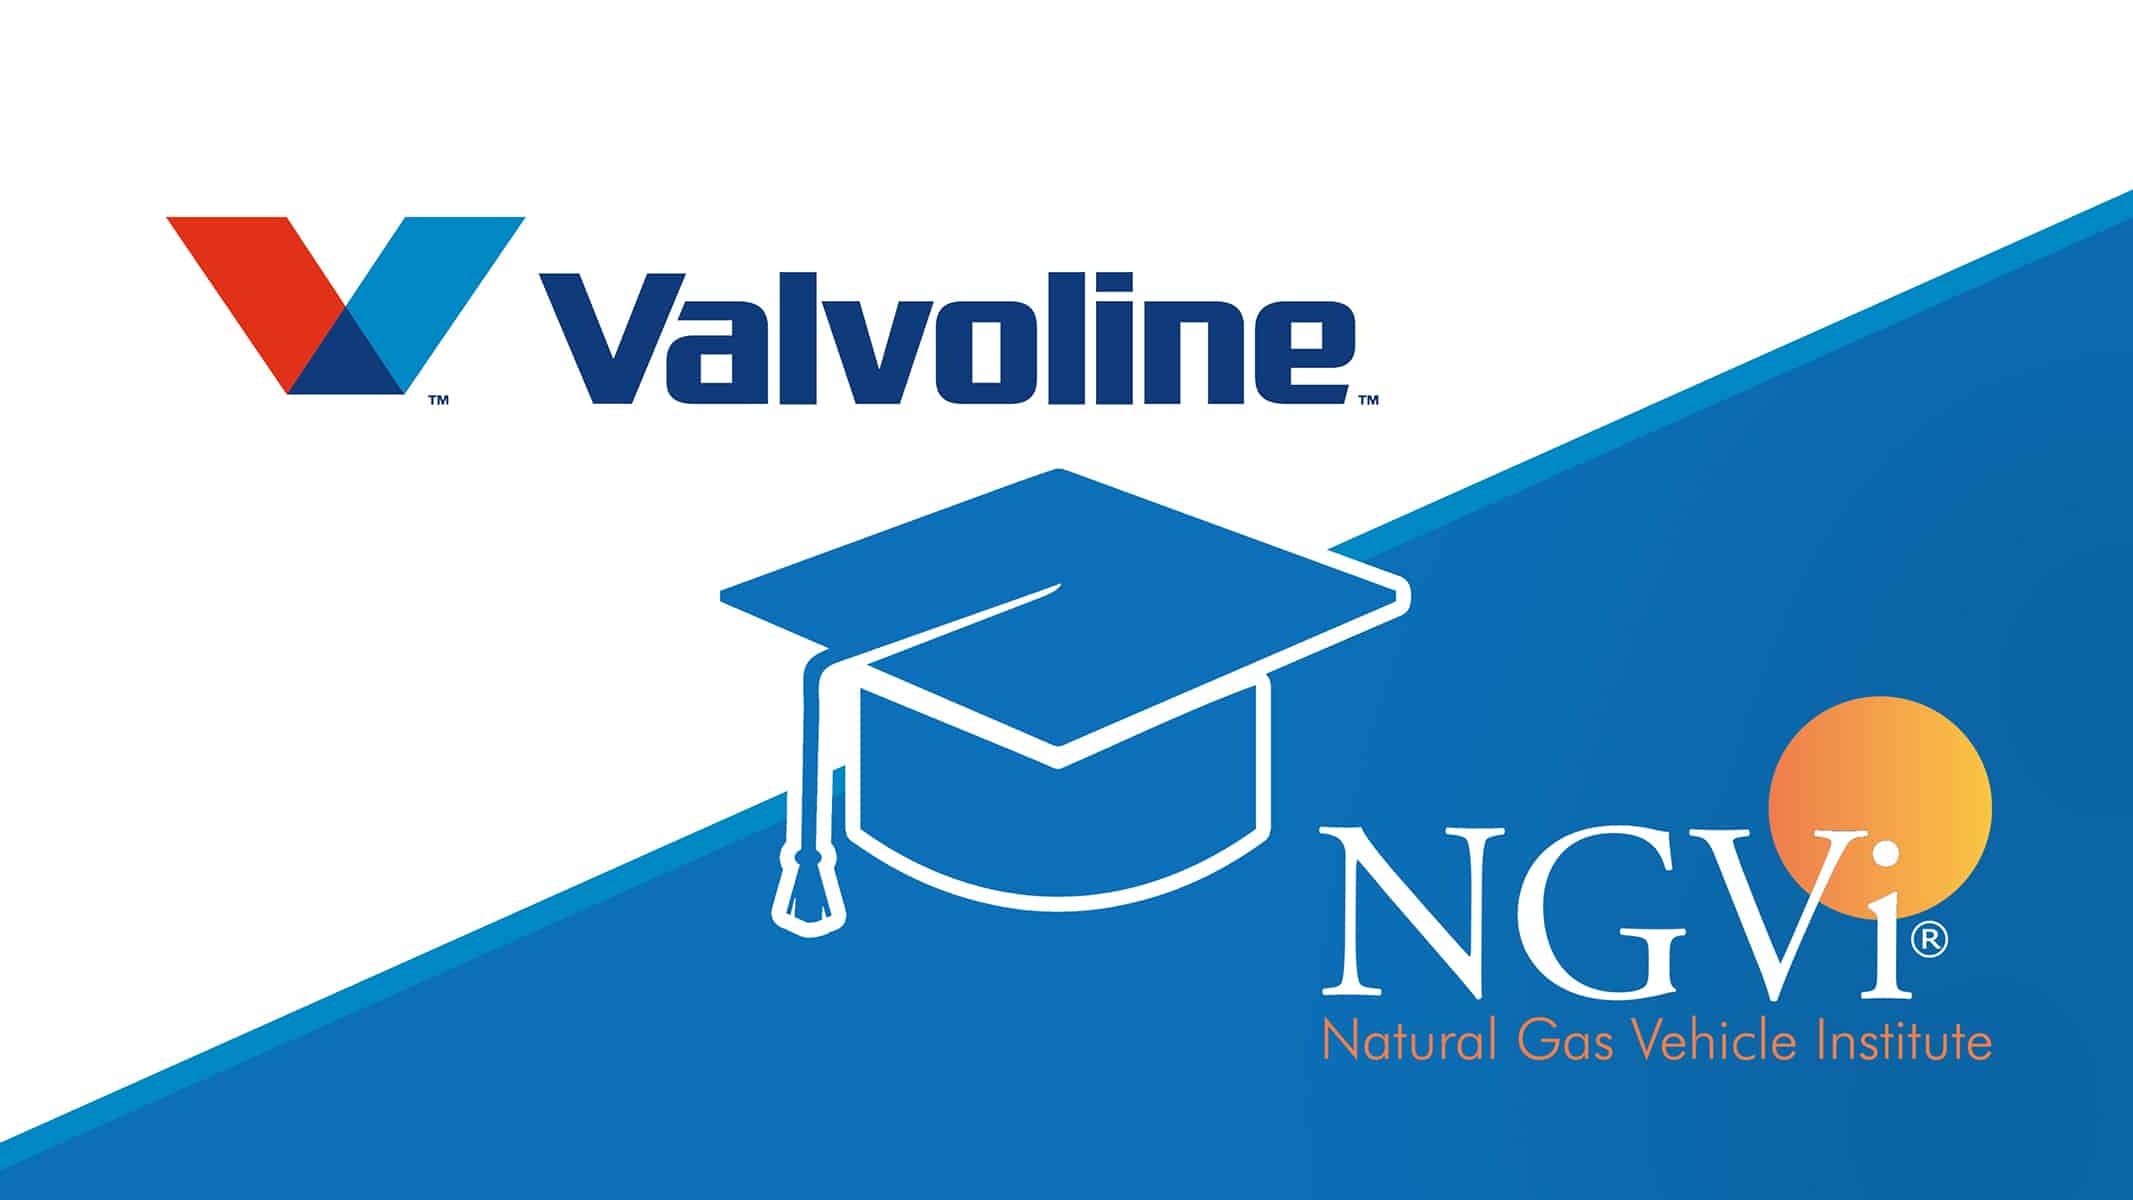 A graduation cap icon is displayed in between the logos for Valvoline and NGVi.